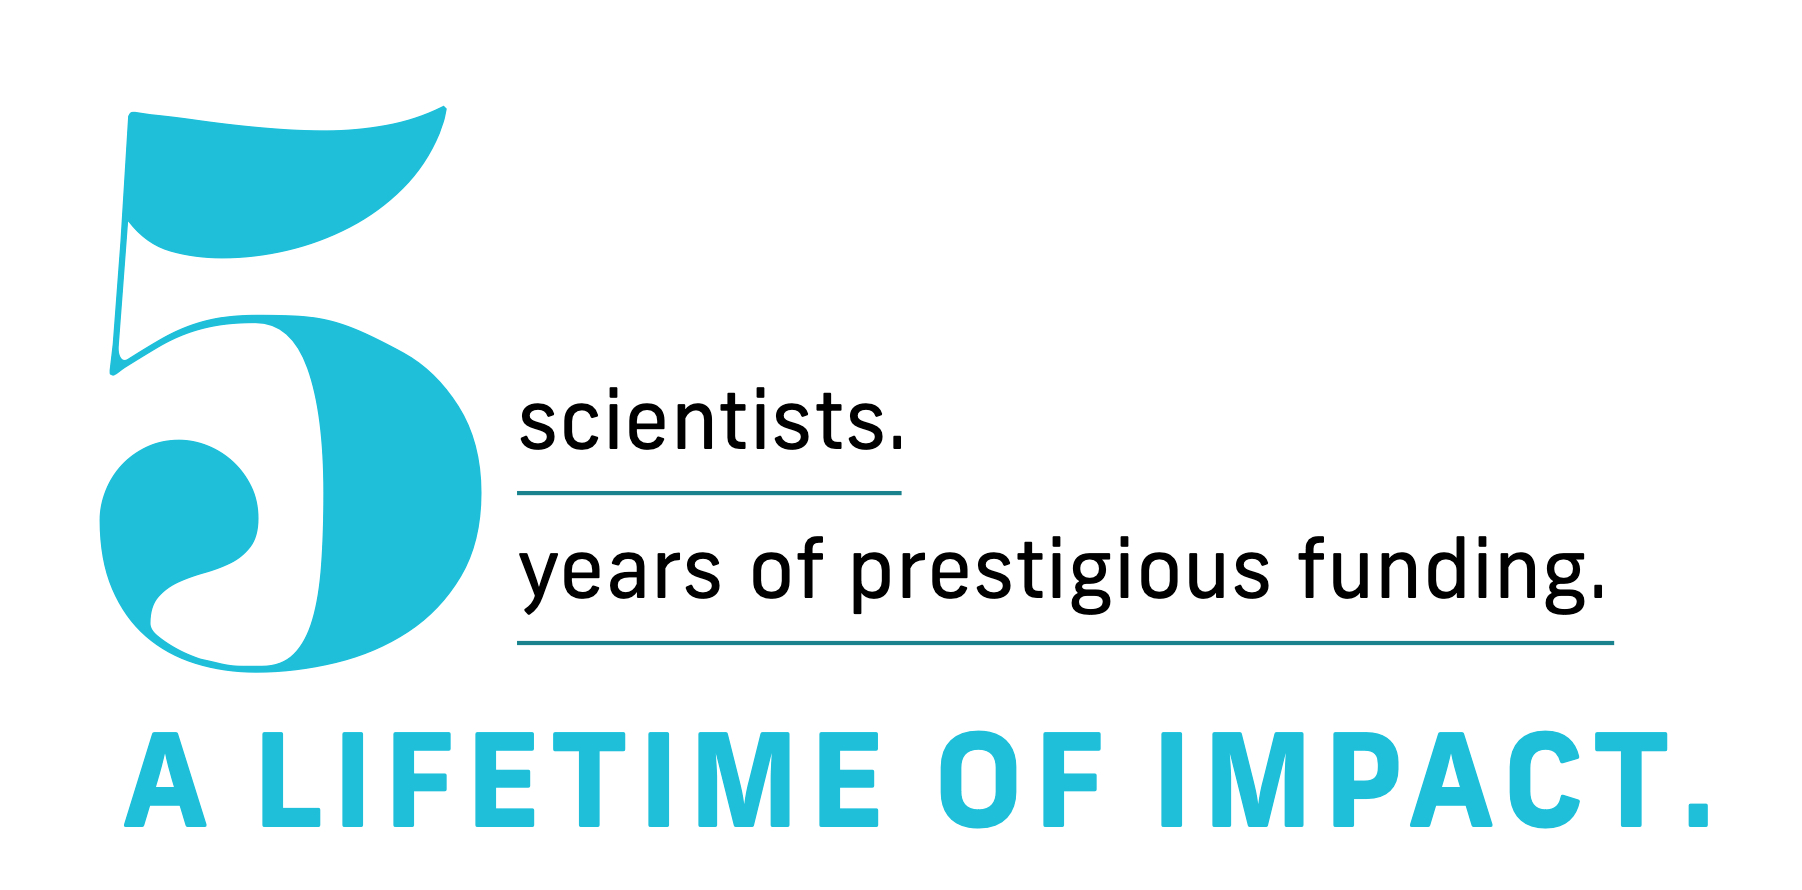 5 scientists, 5 years of prestigious funding, a lifetime of impact.